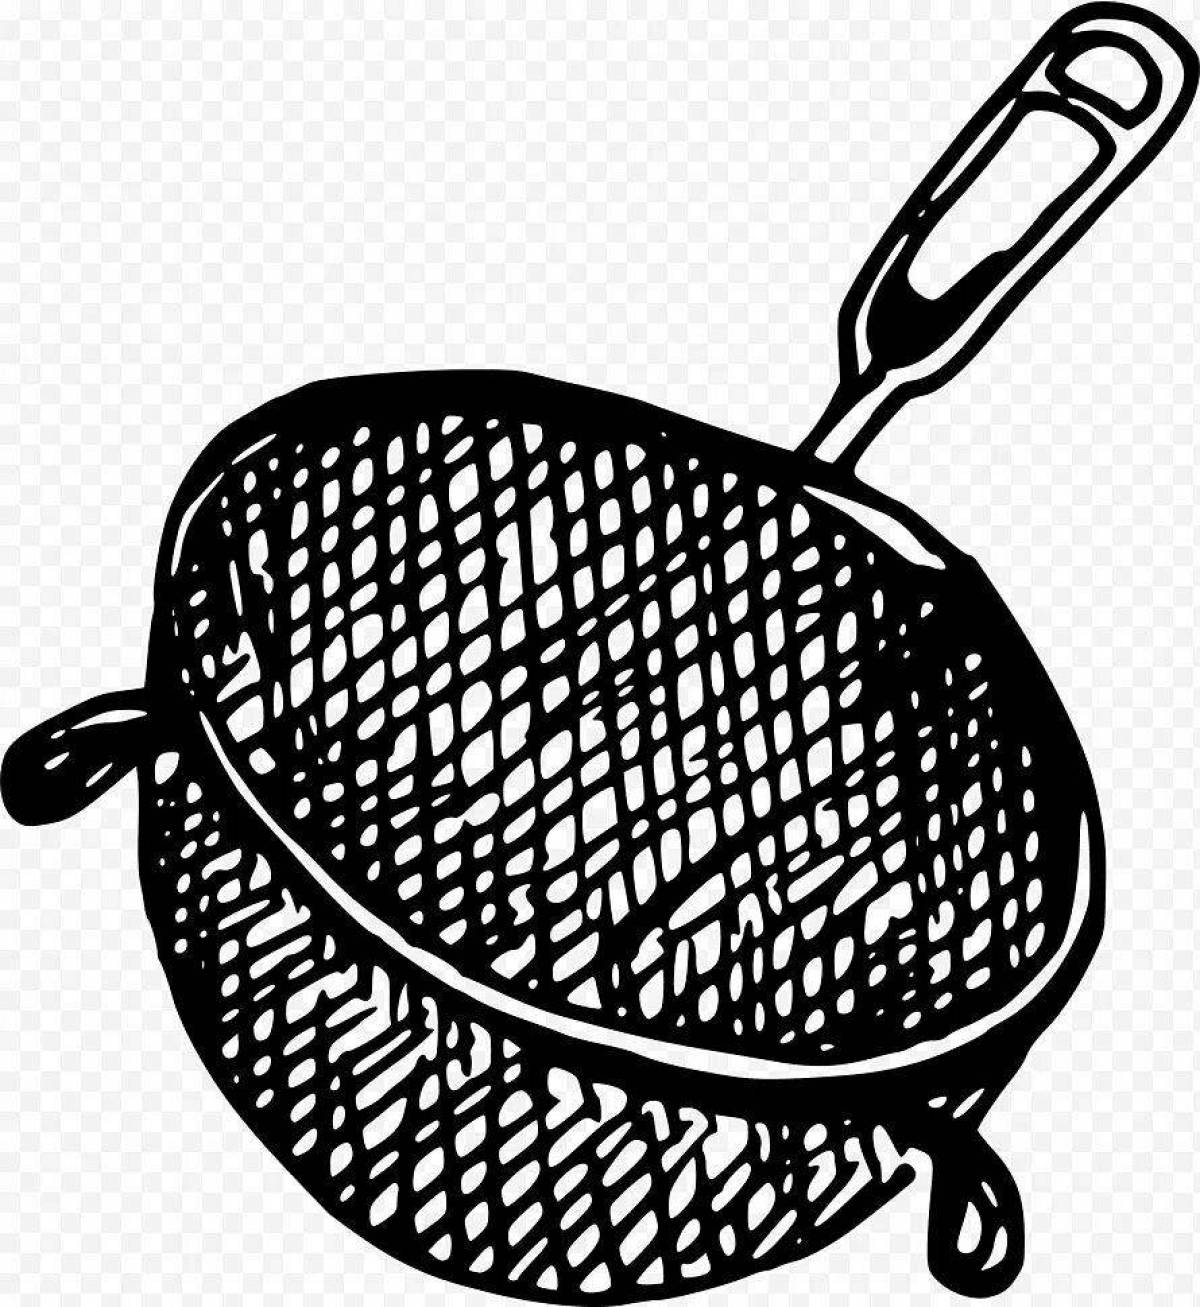 Little sieve coloring page for little ones